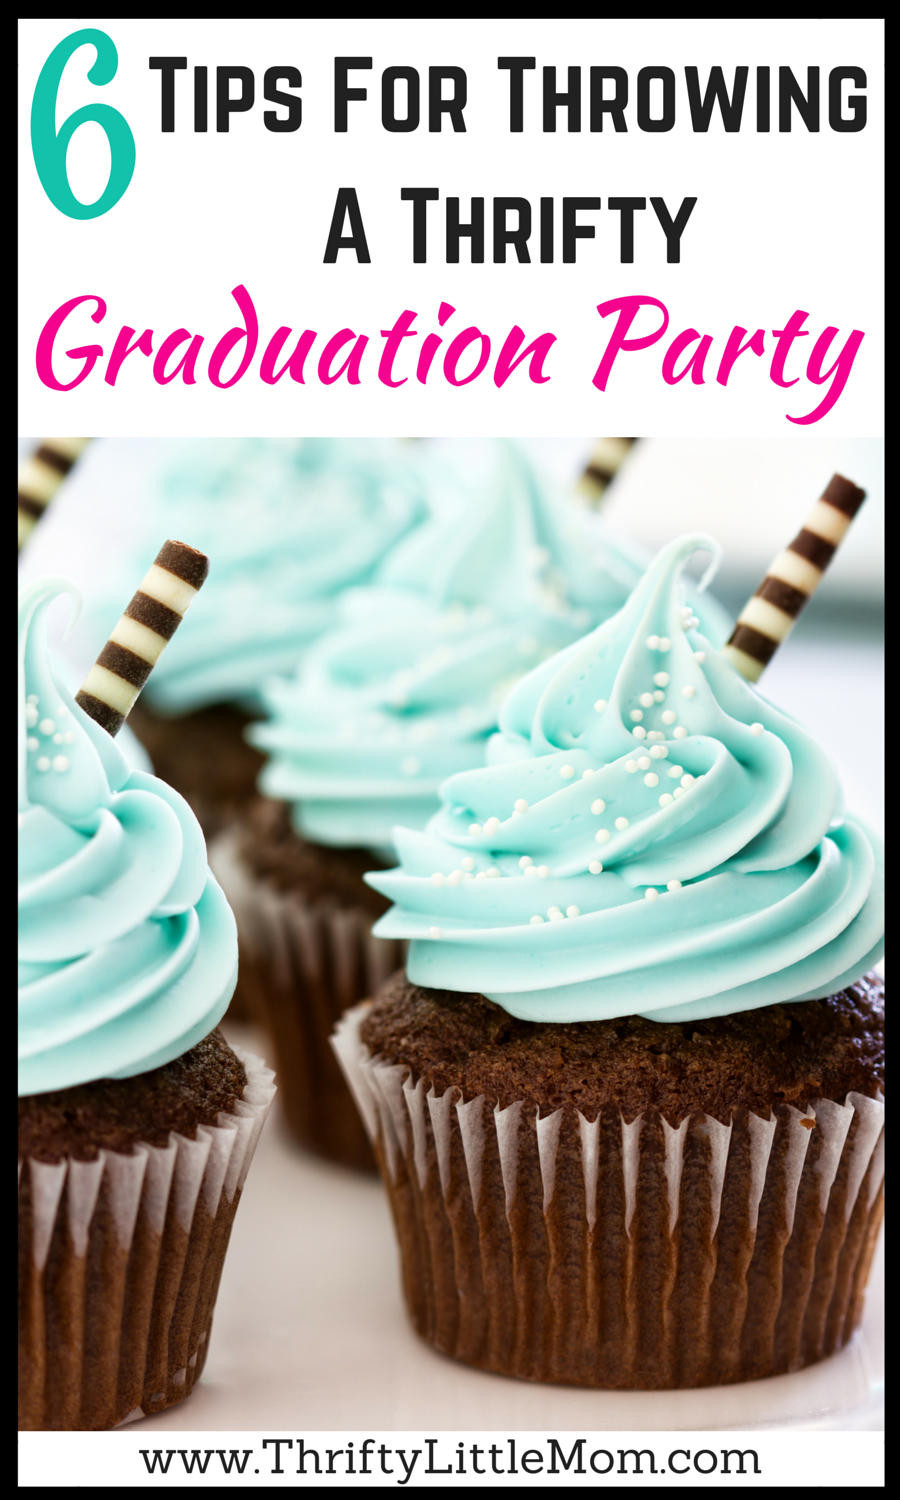 Party Planning Ideas For Graduation
 6 Tips For Throwing a Thrifty Graduation Party Thrifty